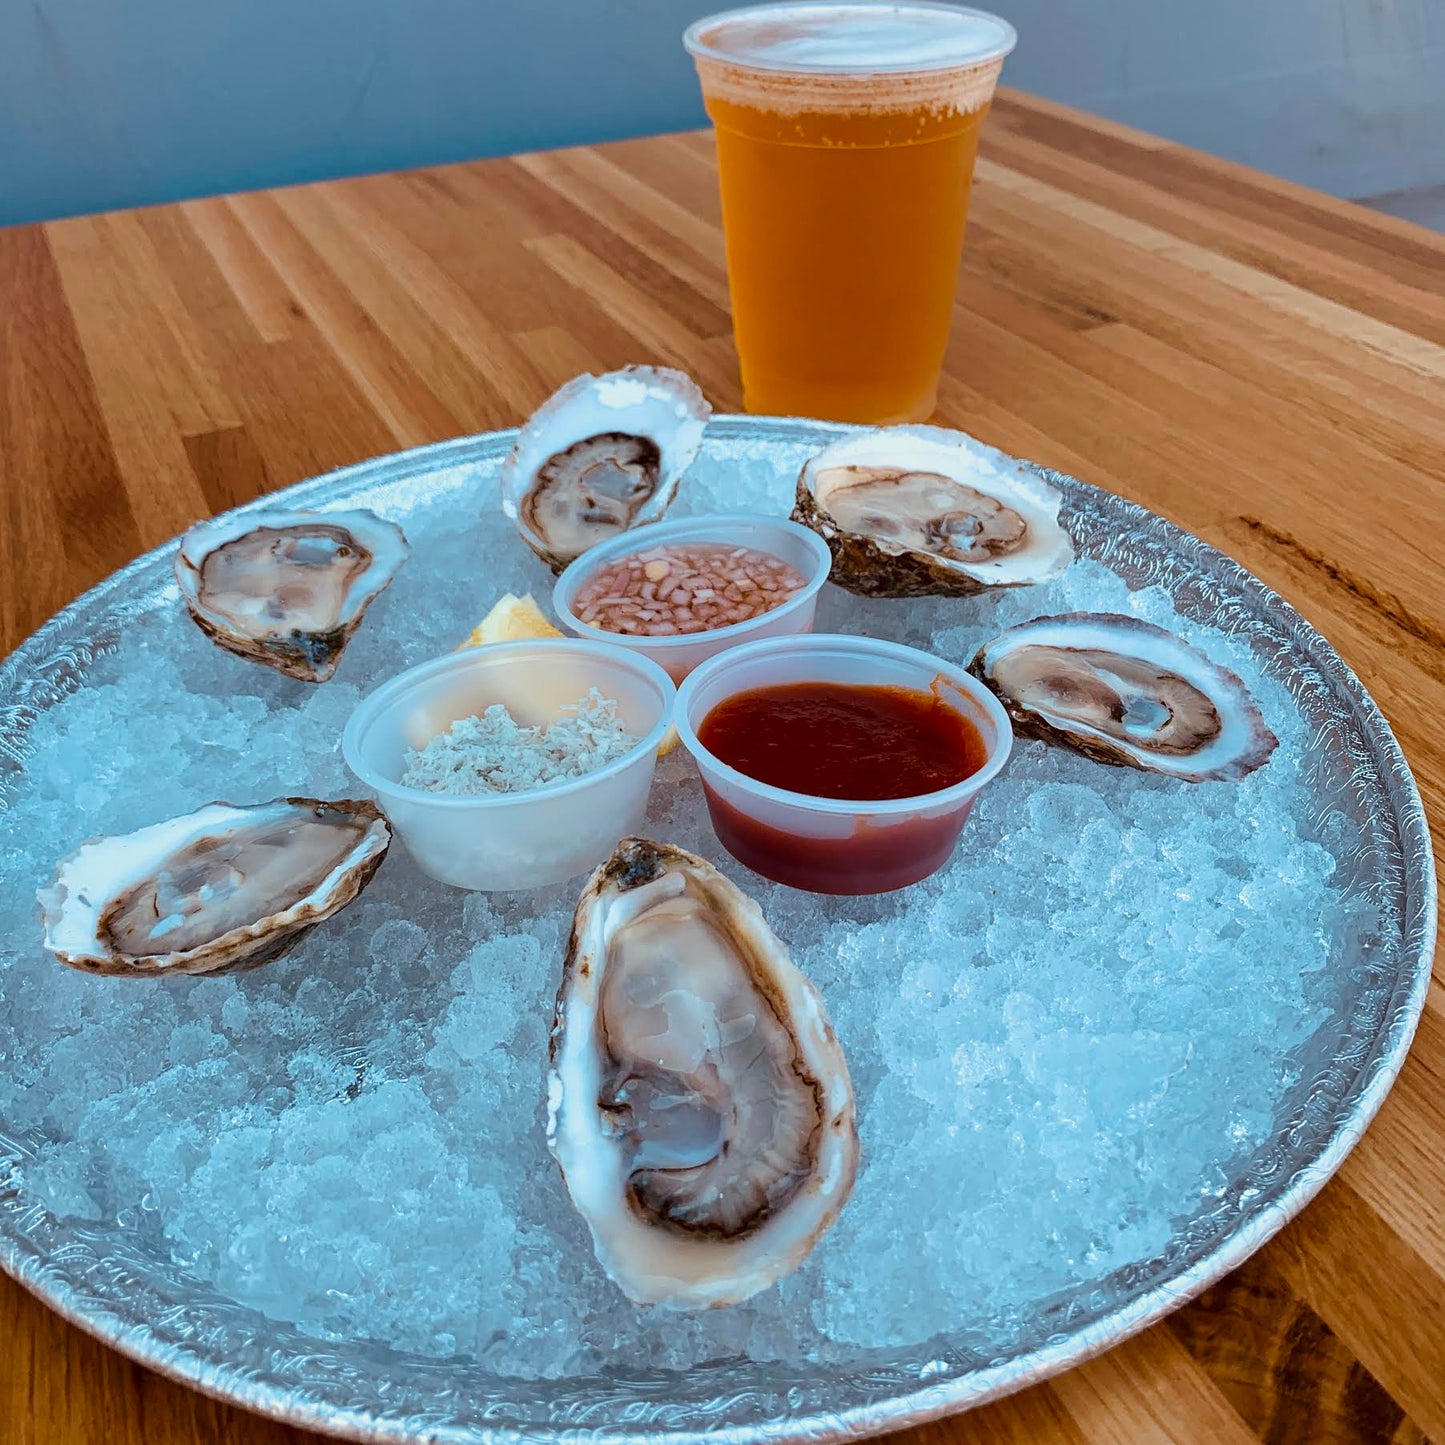 Having friends over for a cook out? Try adding our fresh oysters to the grill, and enjoy with an IPA or wheat beer for the perfect crowd pleaser.